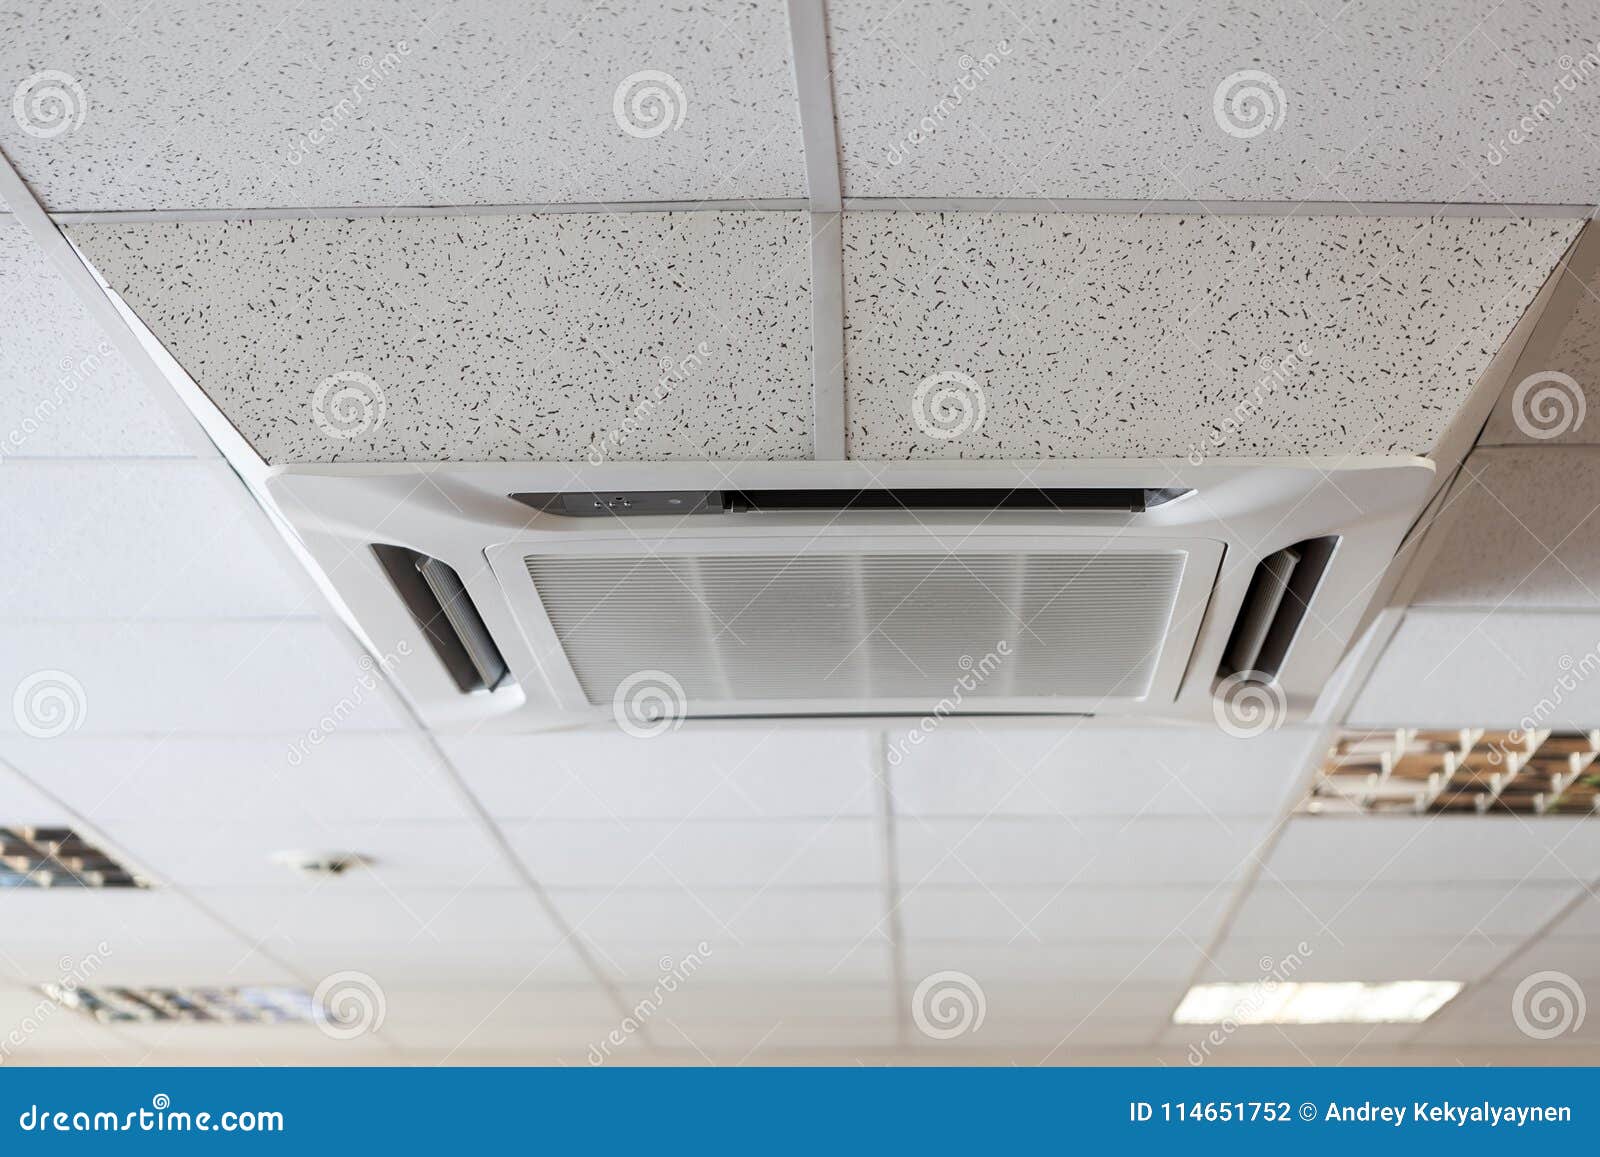 suspended tile ceiling with big air-conditioner unit, office room